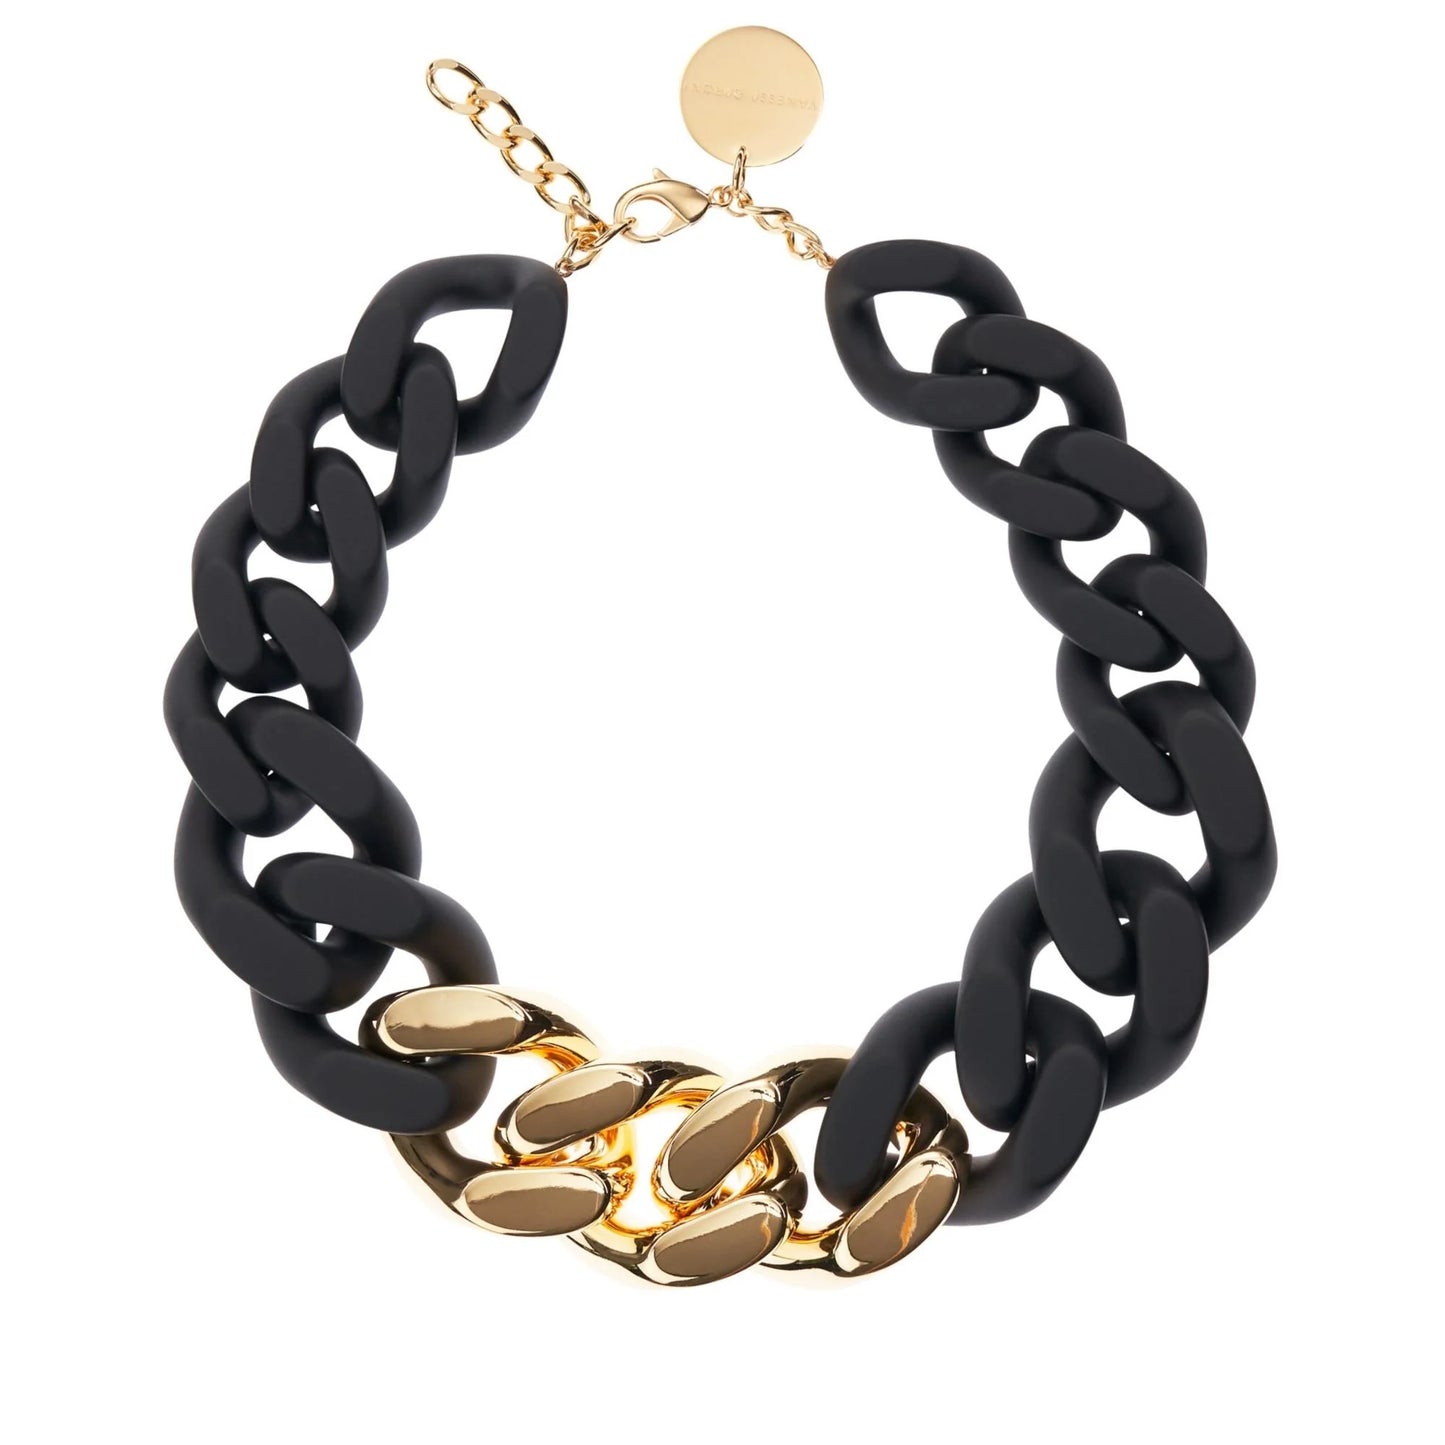 Great Necklace with Gold - Matt Black by Vanessa Baroni